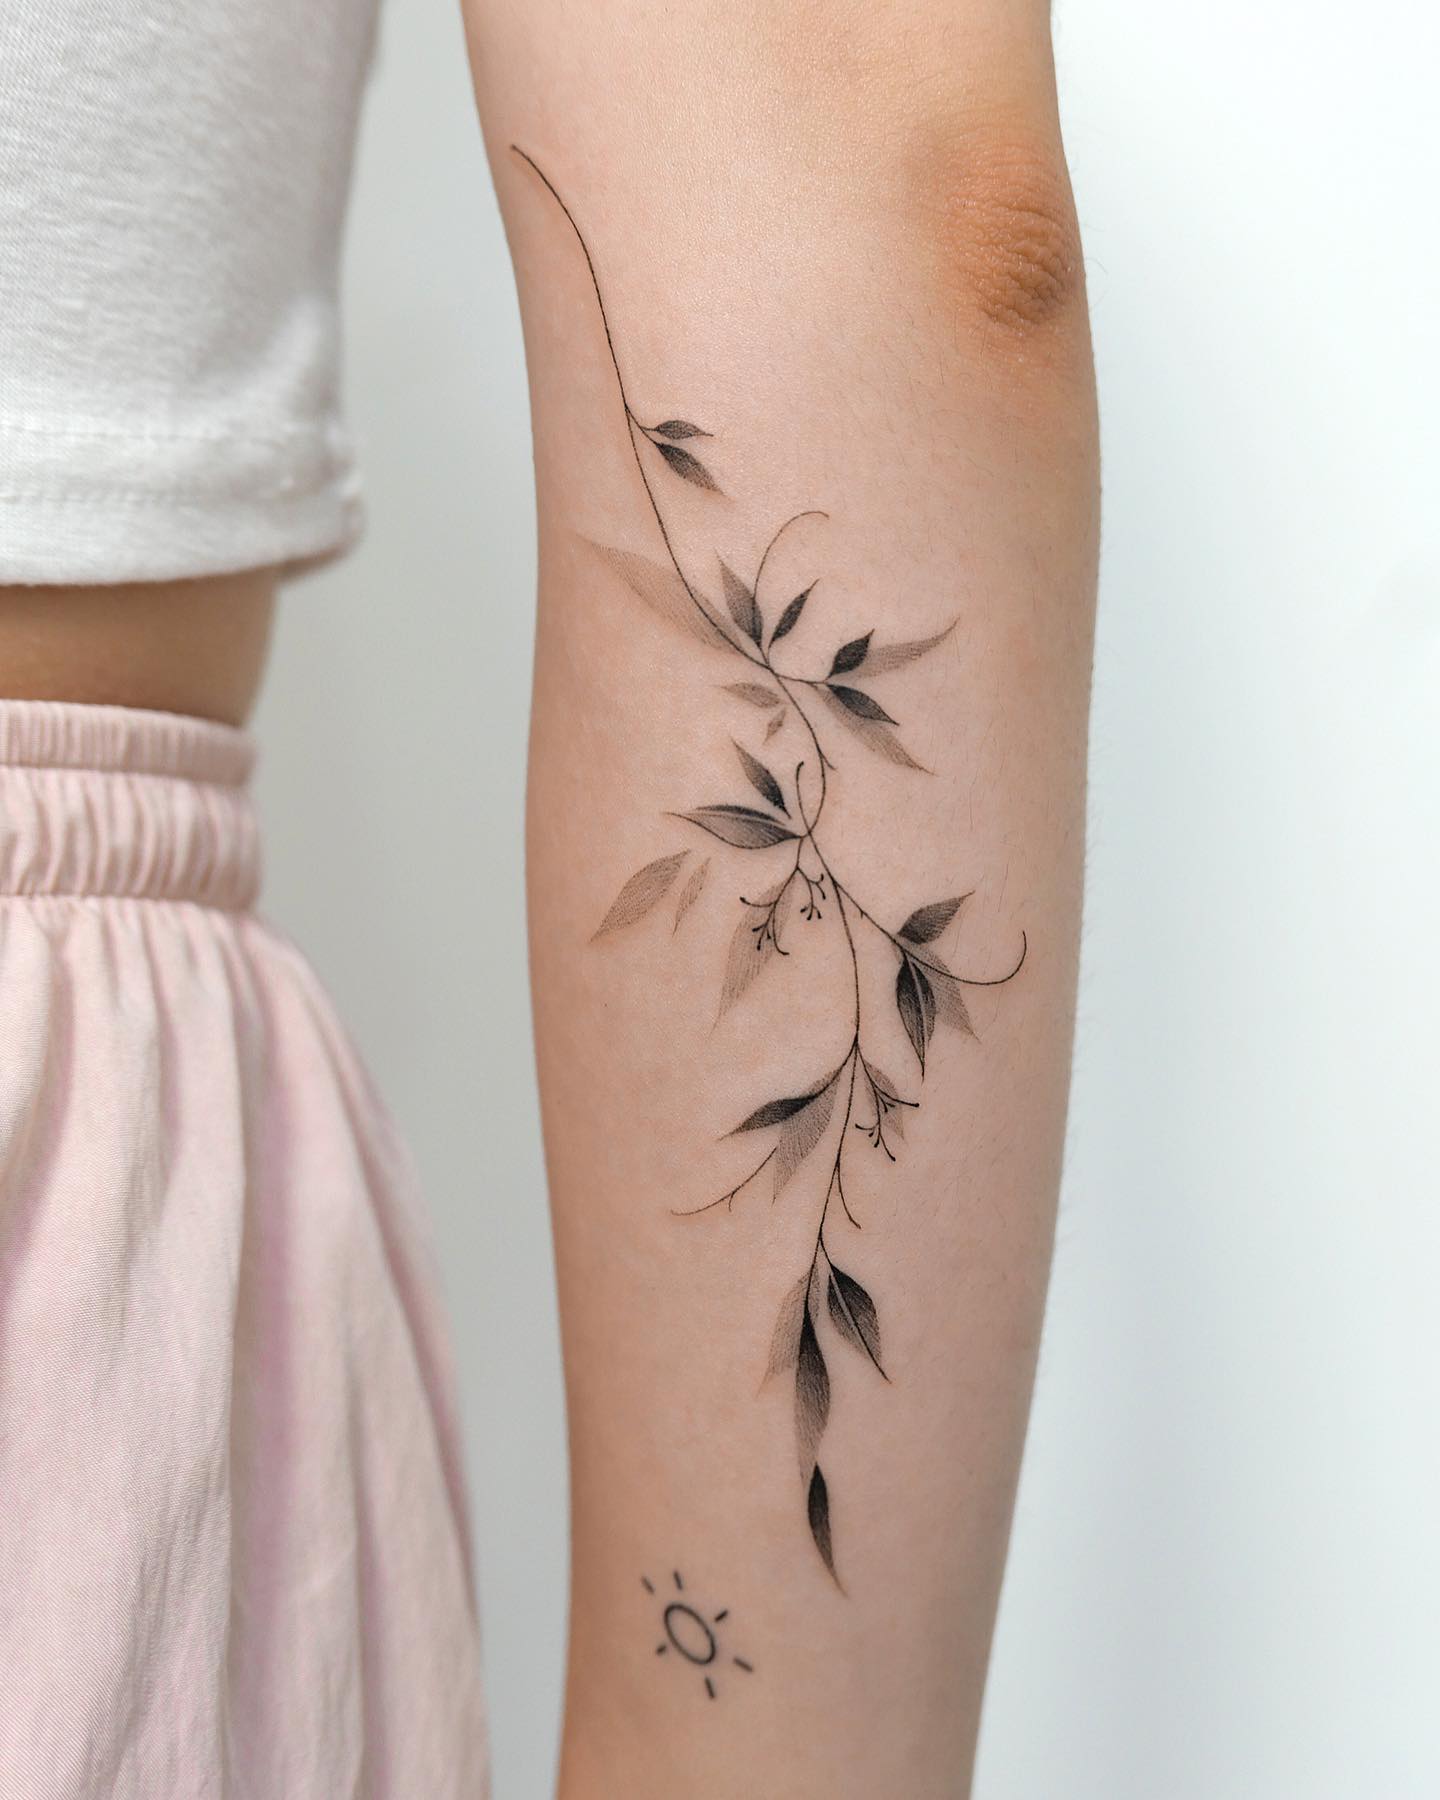 Here is another line tattoo that will amaze you and everyone around you. This black ink leaf tattoo offers a depth because of its shading details and this look is quite amazing to try.